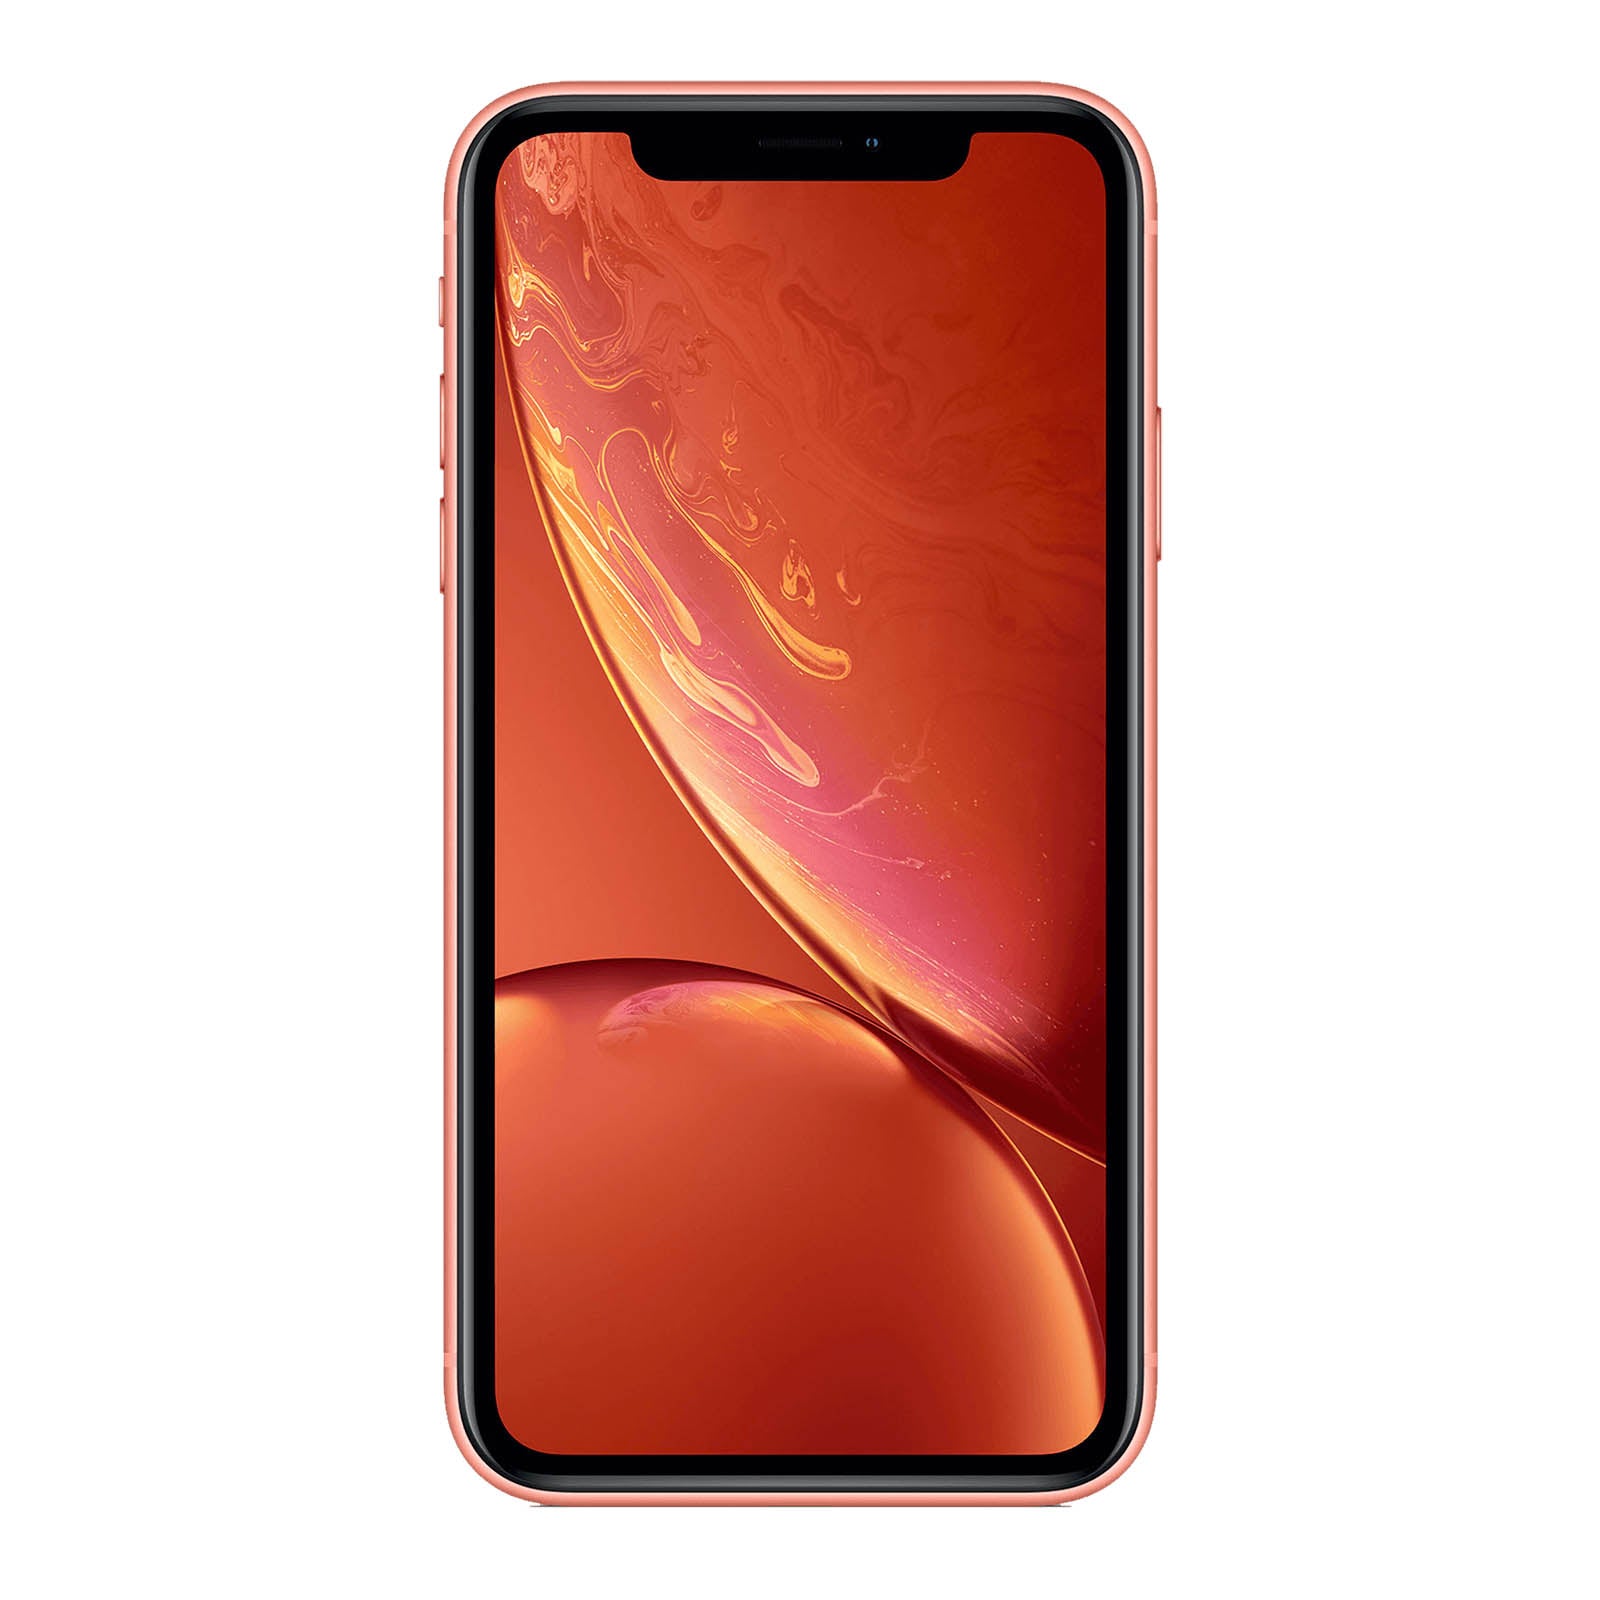 Apple iPhone XR 128GB Coral Good - AT&T